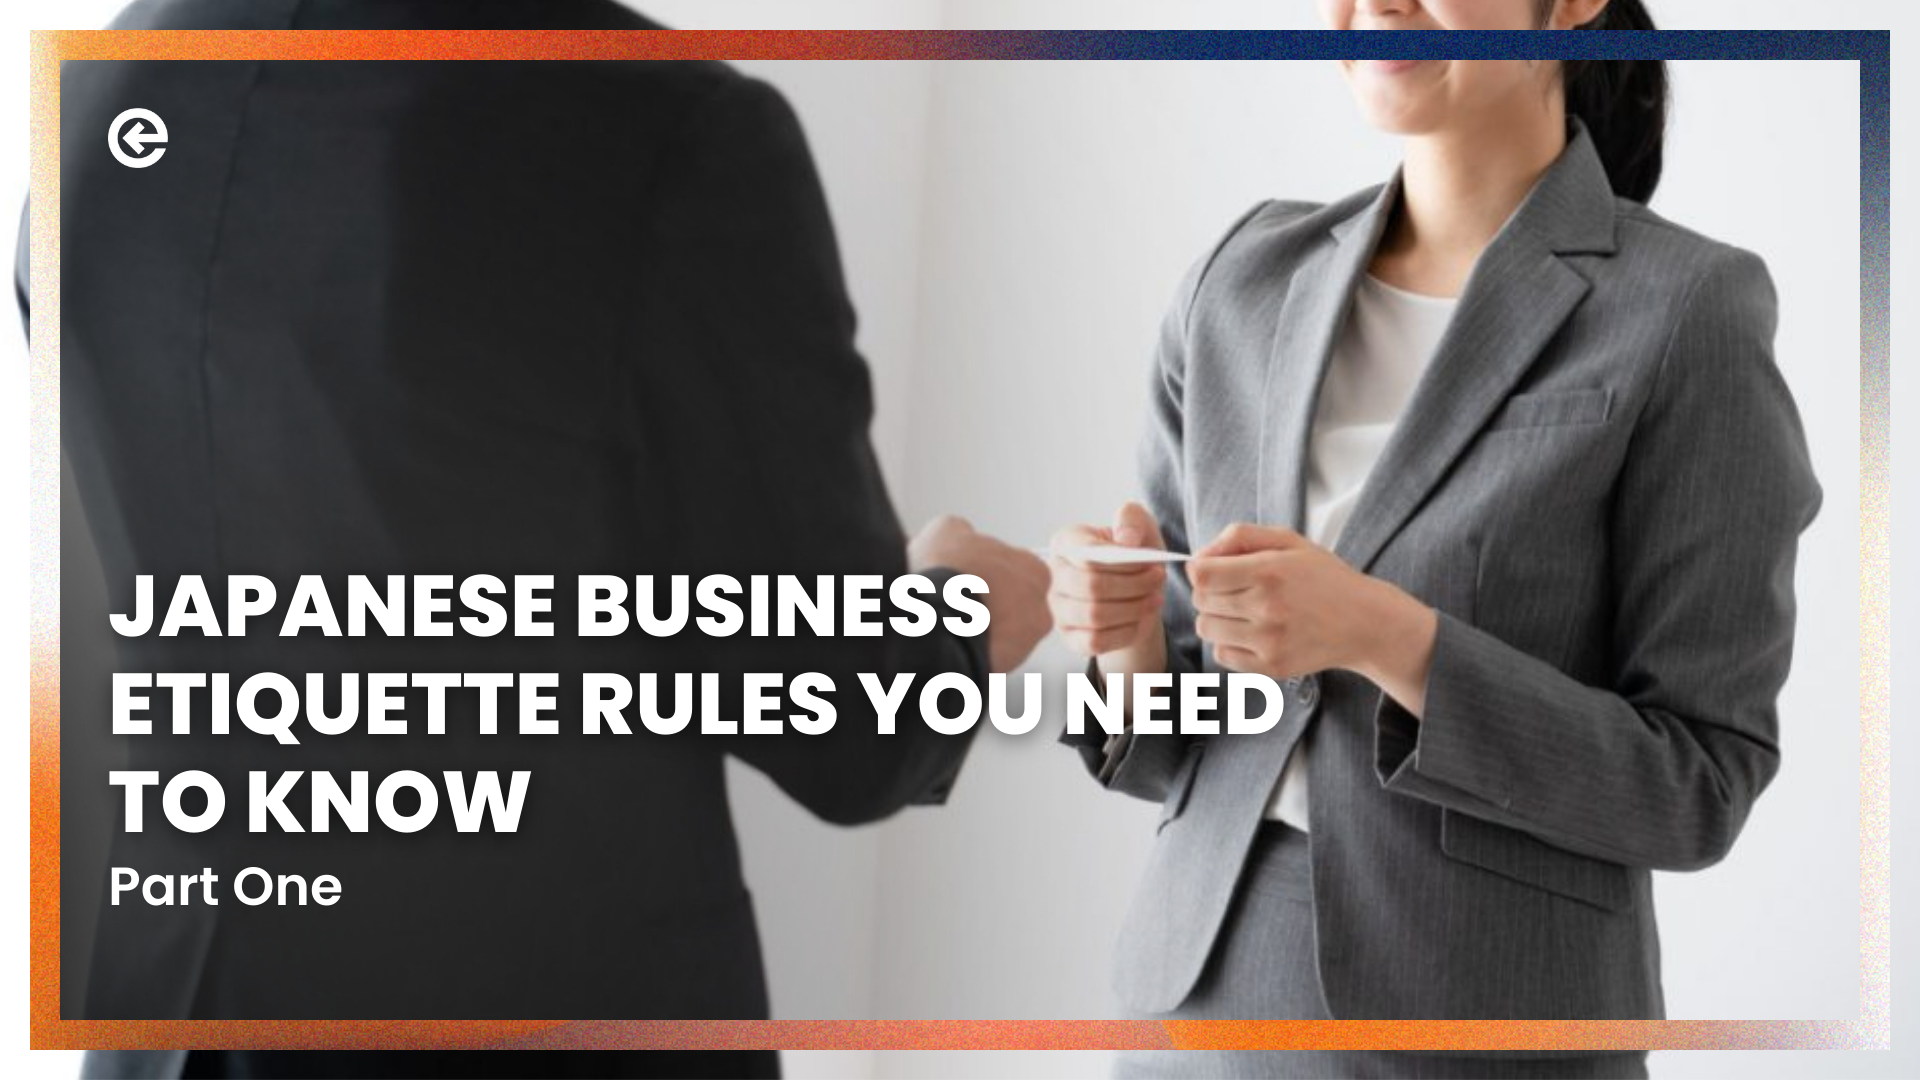 Doing Business In Japan: Important Etiquette Rules You Need To Know (Part 2)